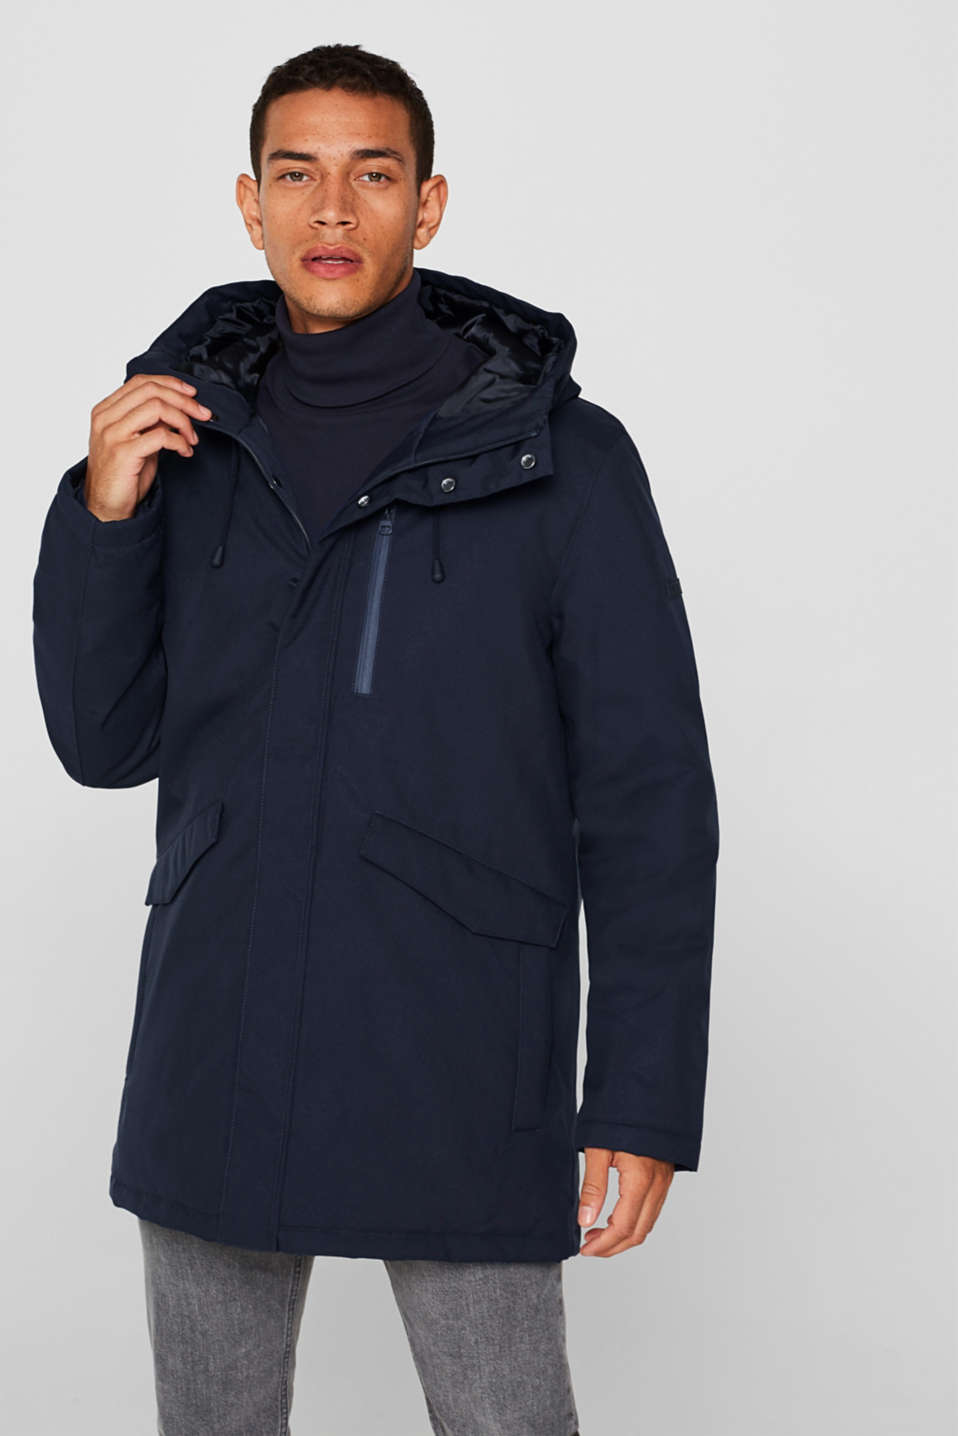 Esprit - Winter jacket with 3M® Thinsulate® filling at our Online Shop